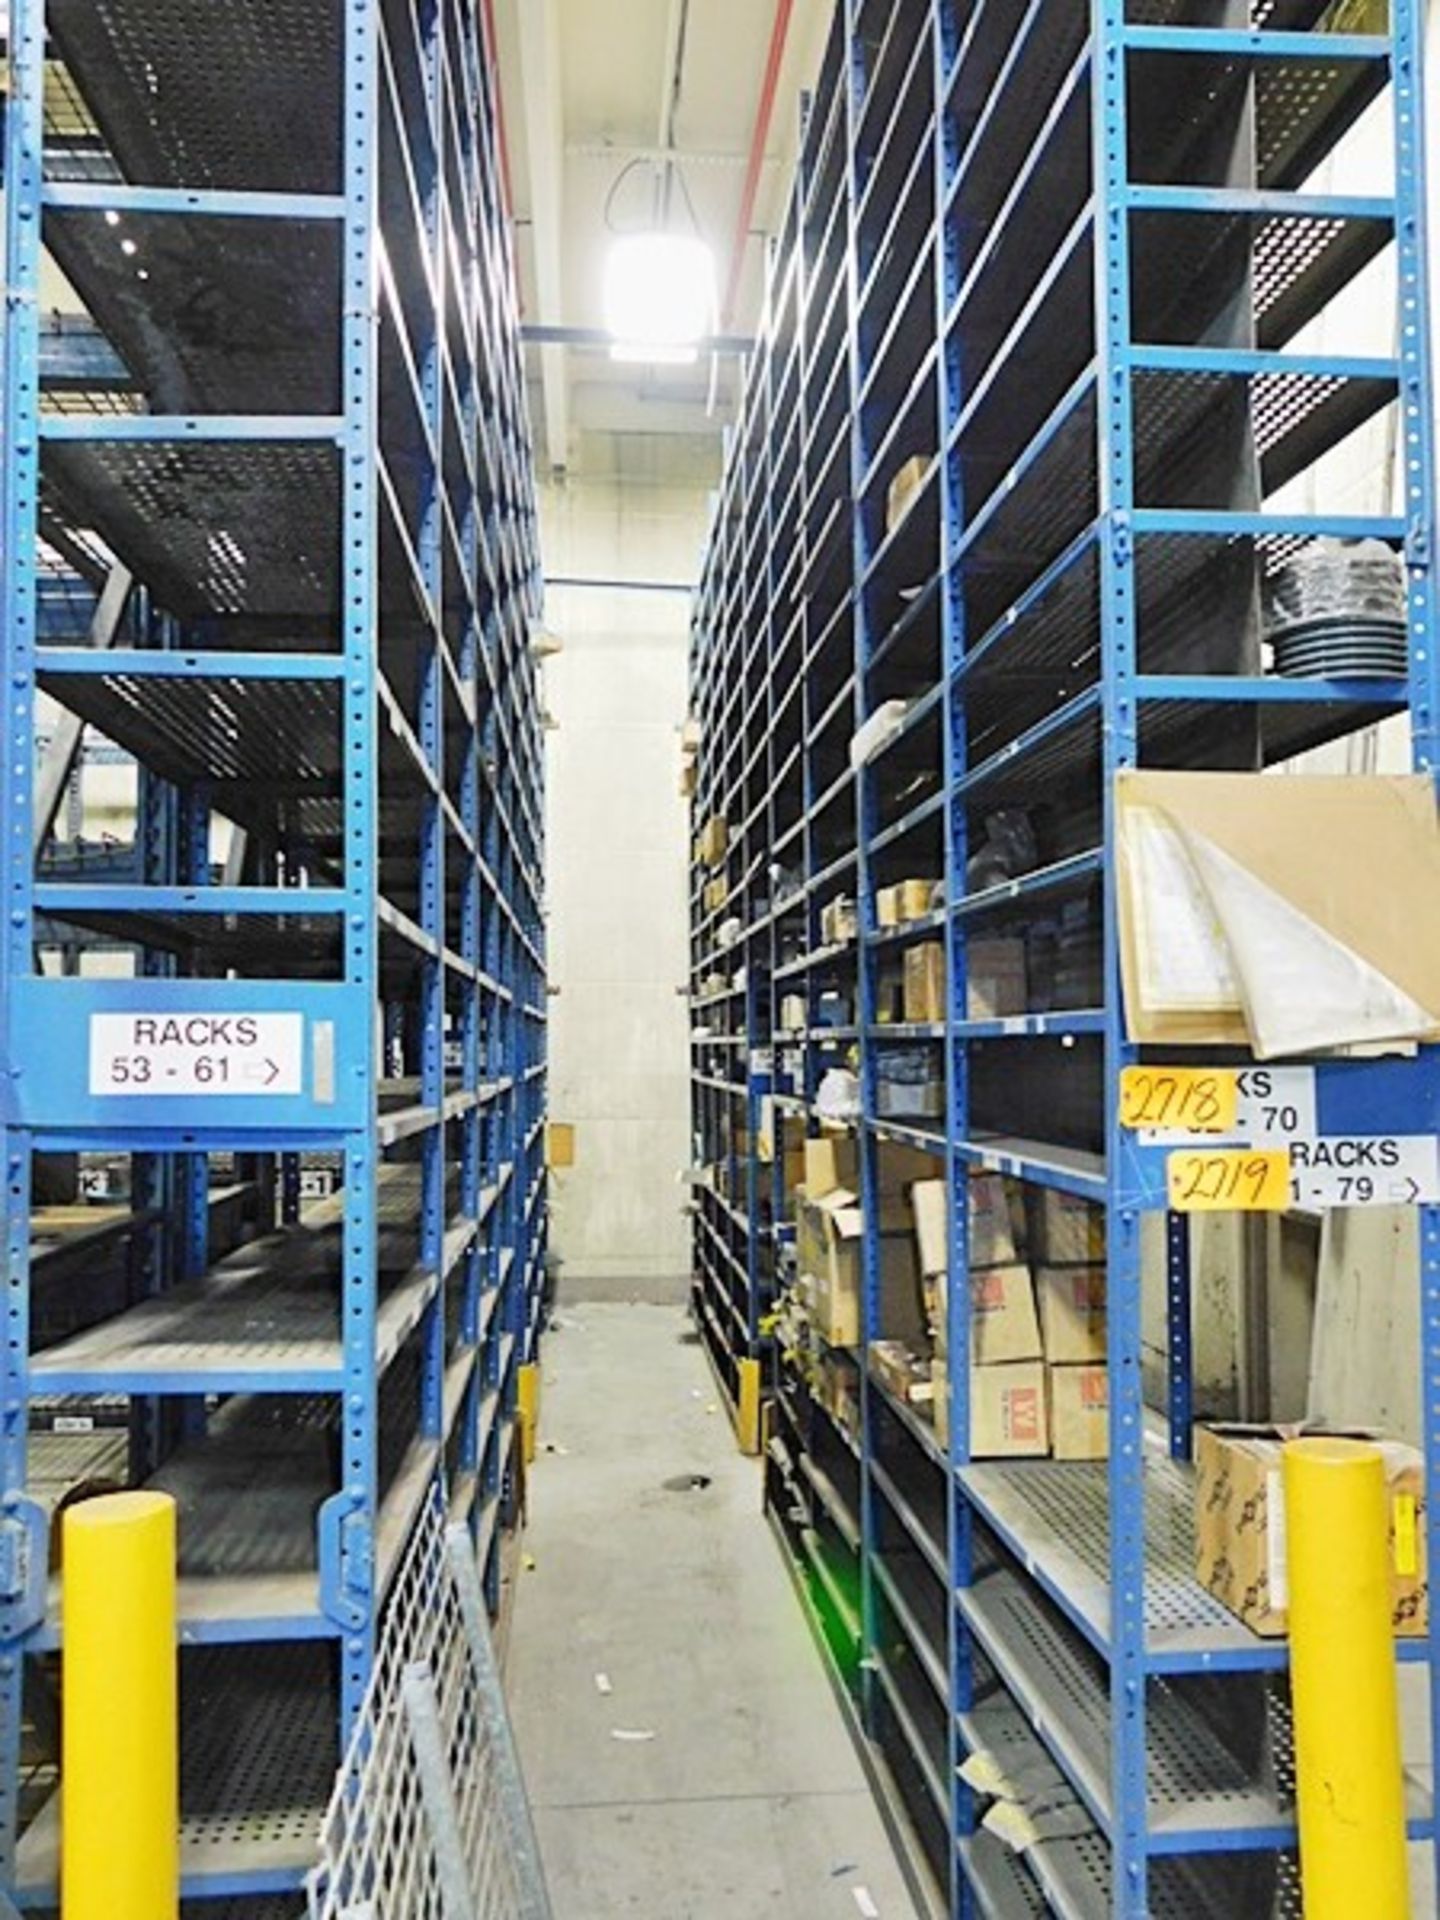 2 Sections of Shelving